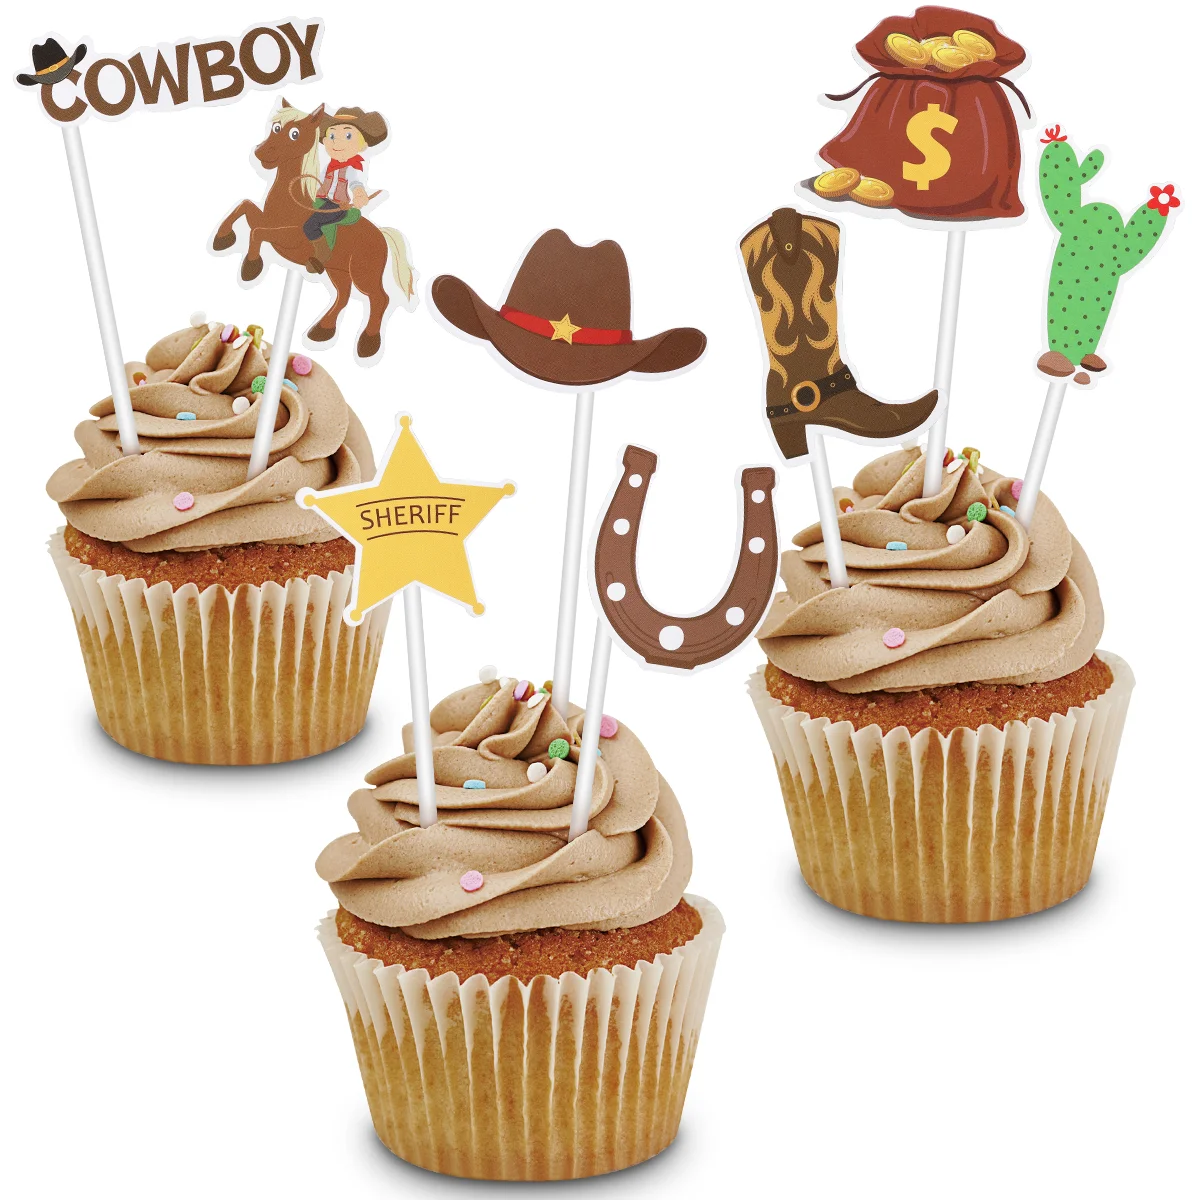 

Cowboy Party Decorations Cake Cupcake Theme Topper Toppers Picks Decor Western Birthday Baby Shower Paper Toothpick Hats Mini